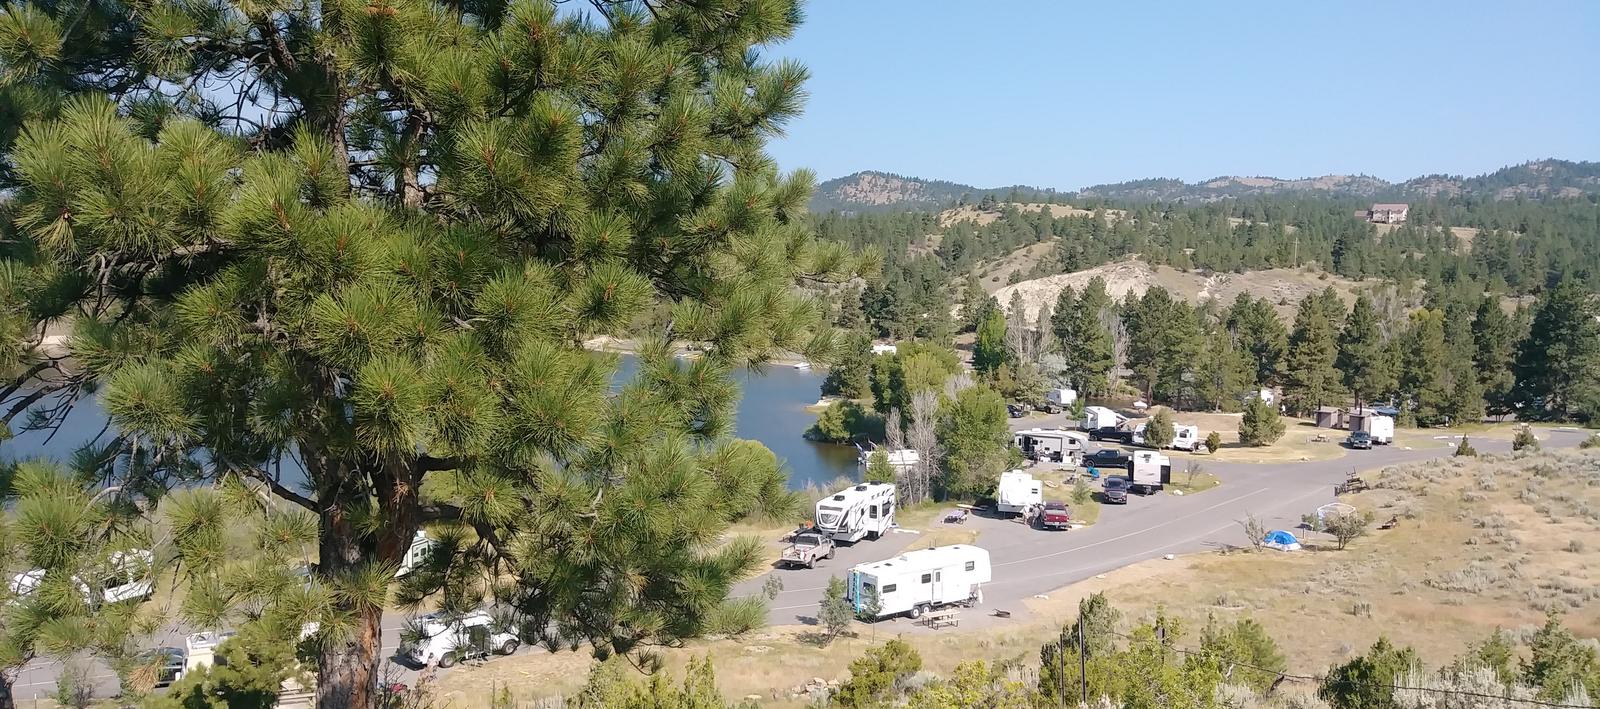 Court Sheriff Campground - Host Site